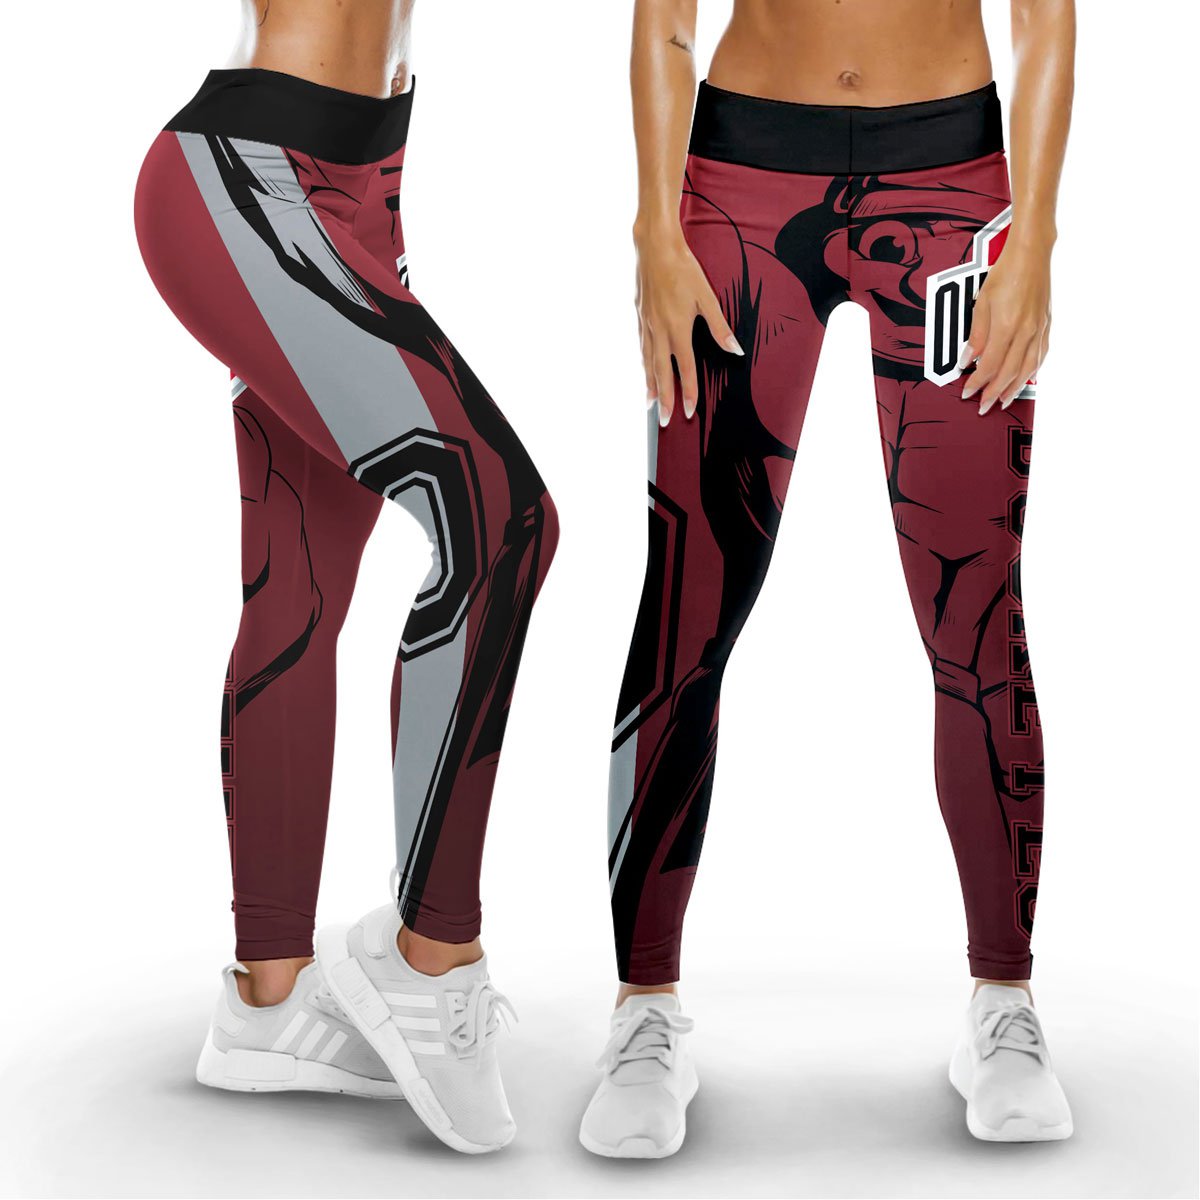 Ohio State Buckeyes Outfit Fitness Set Leggings and Bra